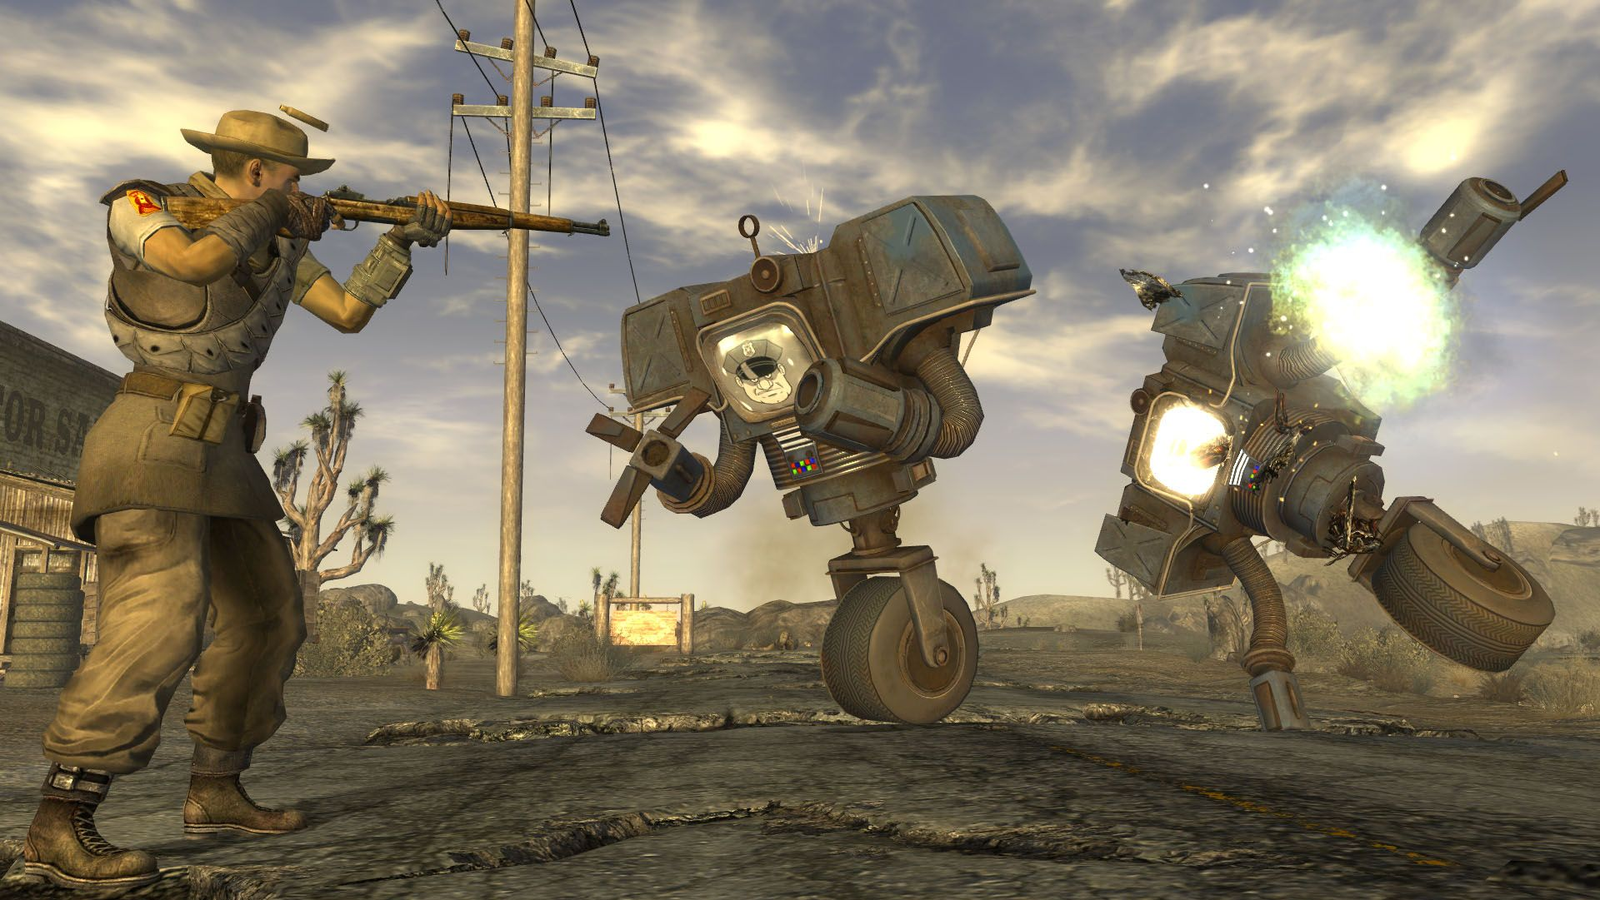 Fallout: New Vegas - Ultimate Edition  Download and Buy Today - Epic Games  Store